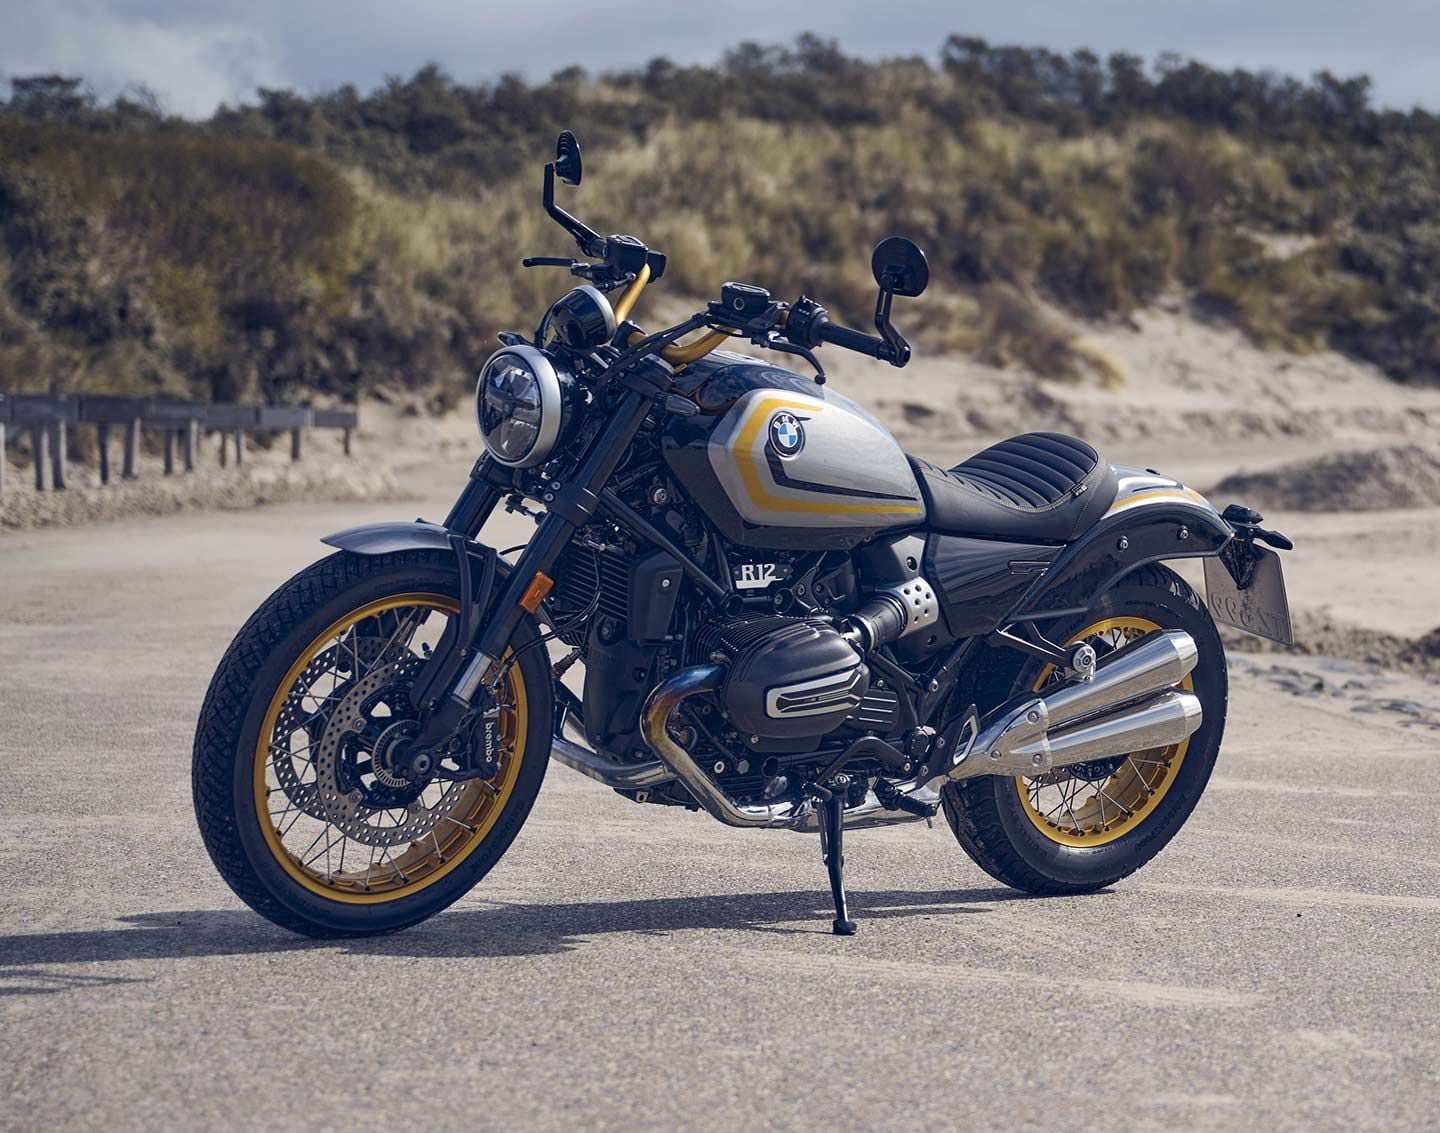 The new 2024 R 12 cruiser shares its boxer engine and new frame with the R 12 nineT, but rolls with a differently shaped steel tank and a more sedate engine tune.